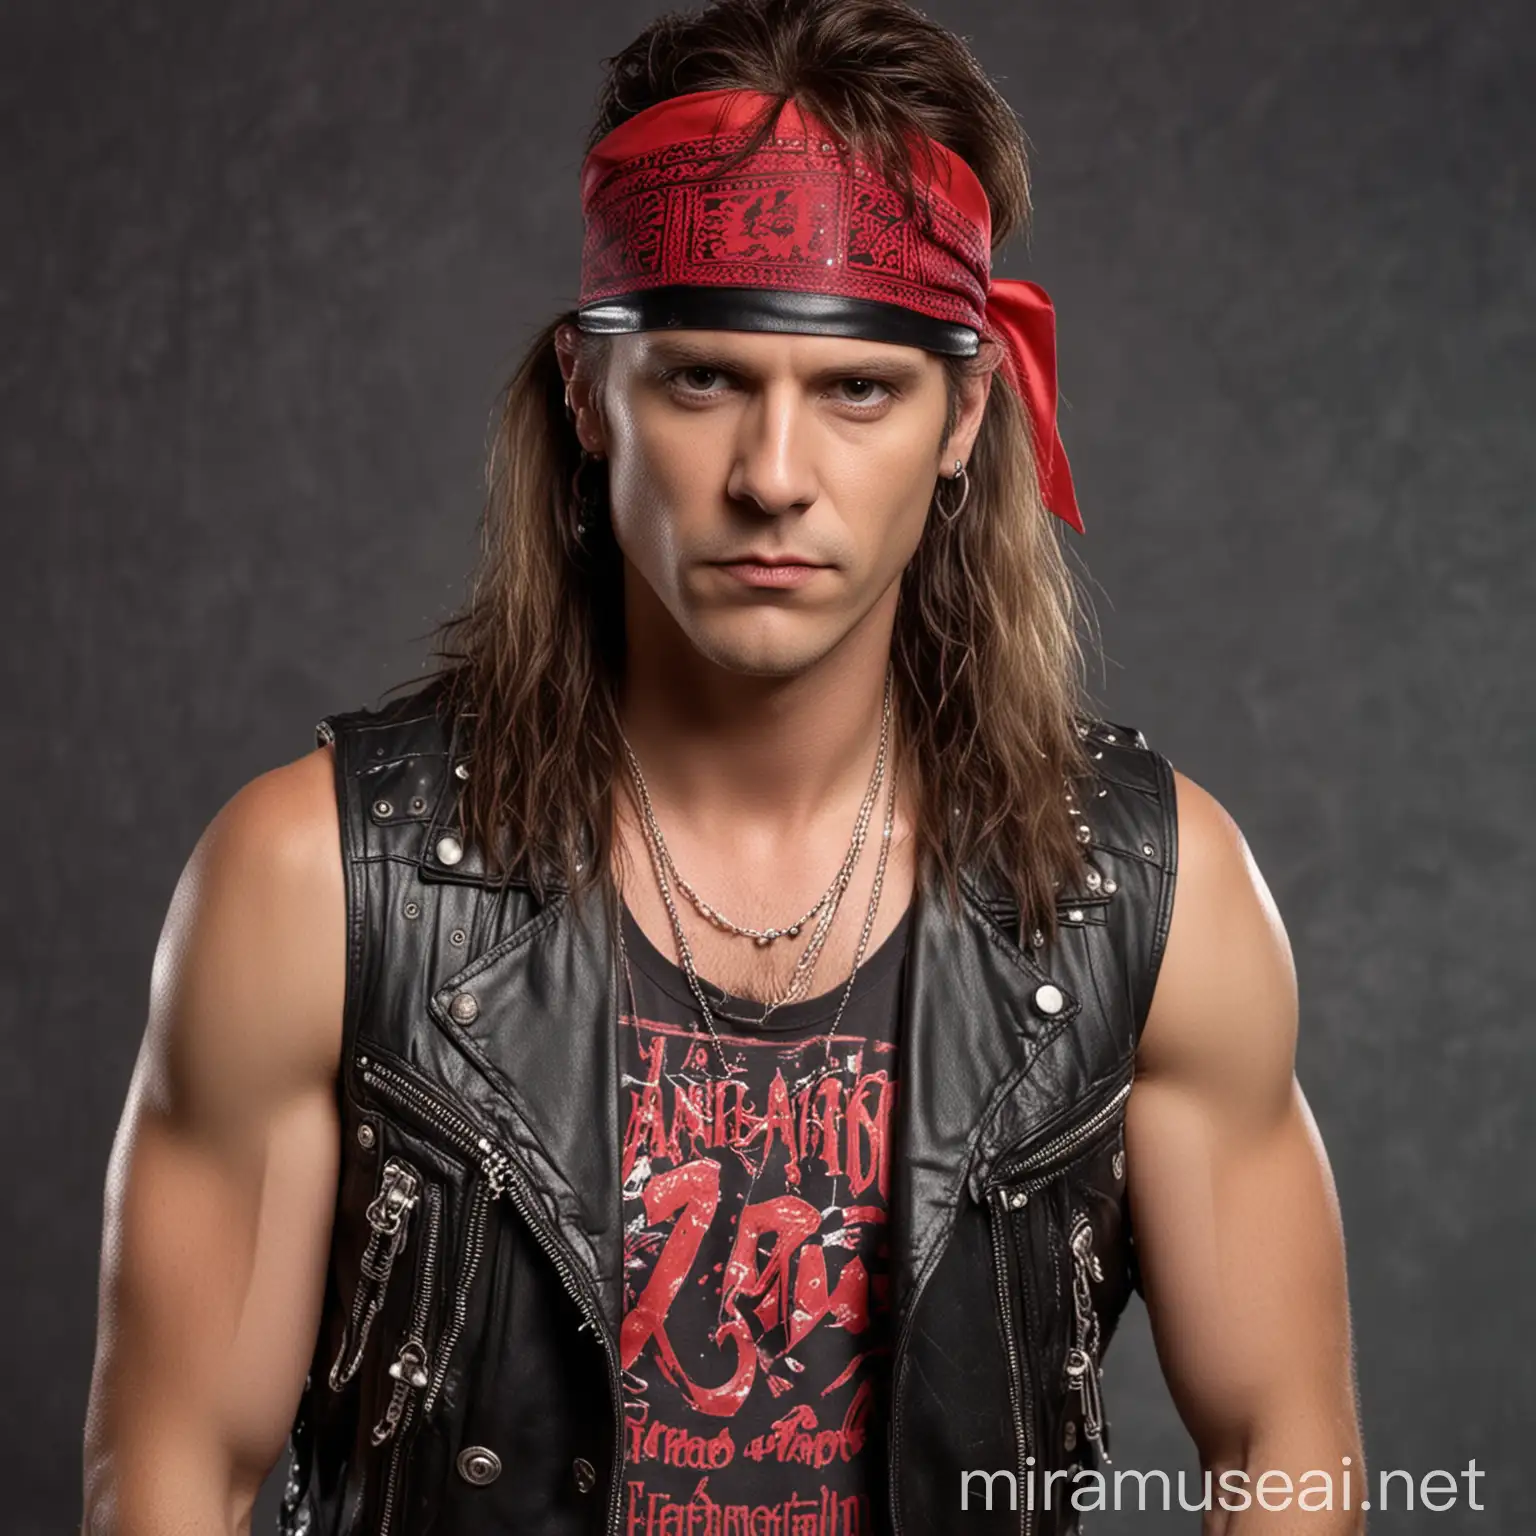 an 80s glam metal rocker with a mullet and a red bandana on his head, wearing a tank top and a leather vest